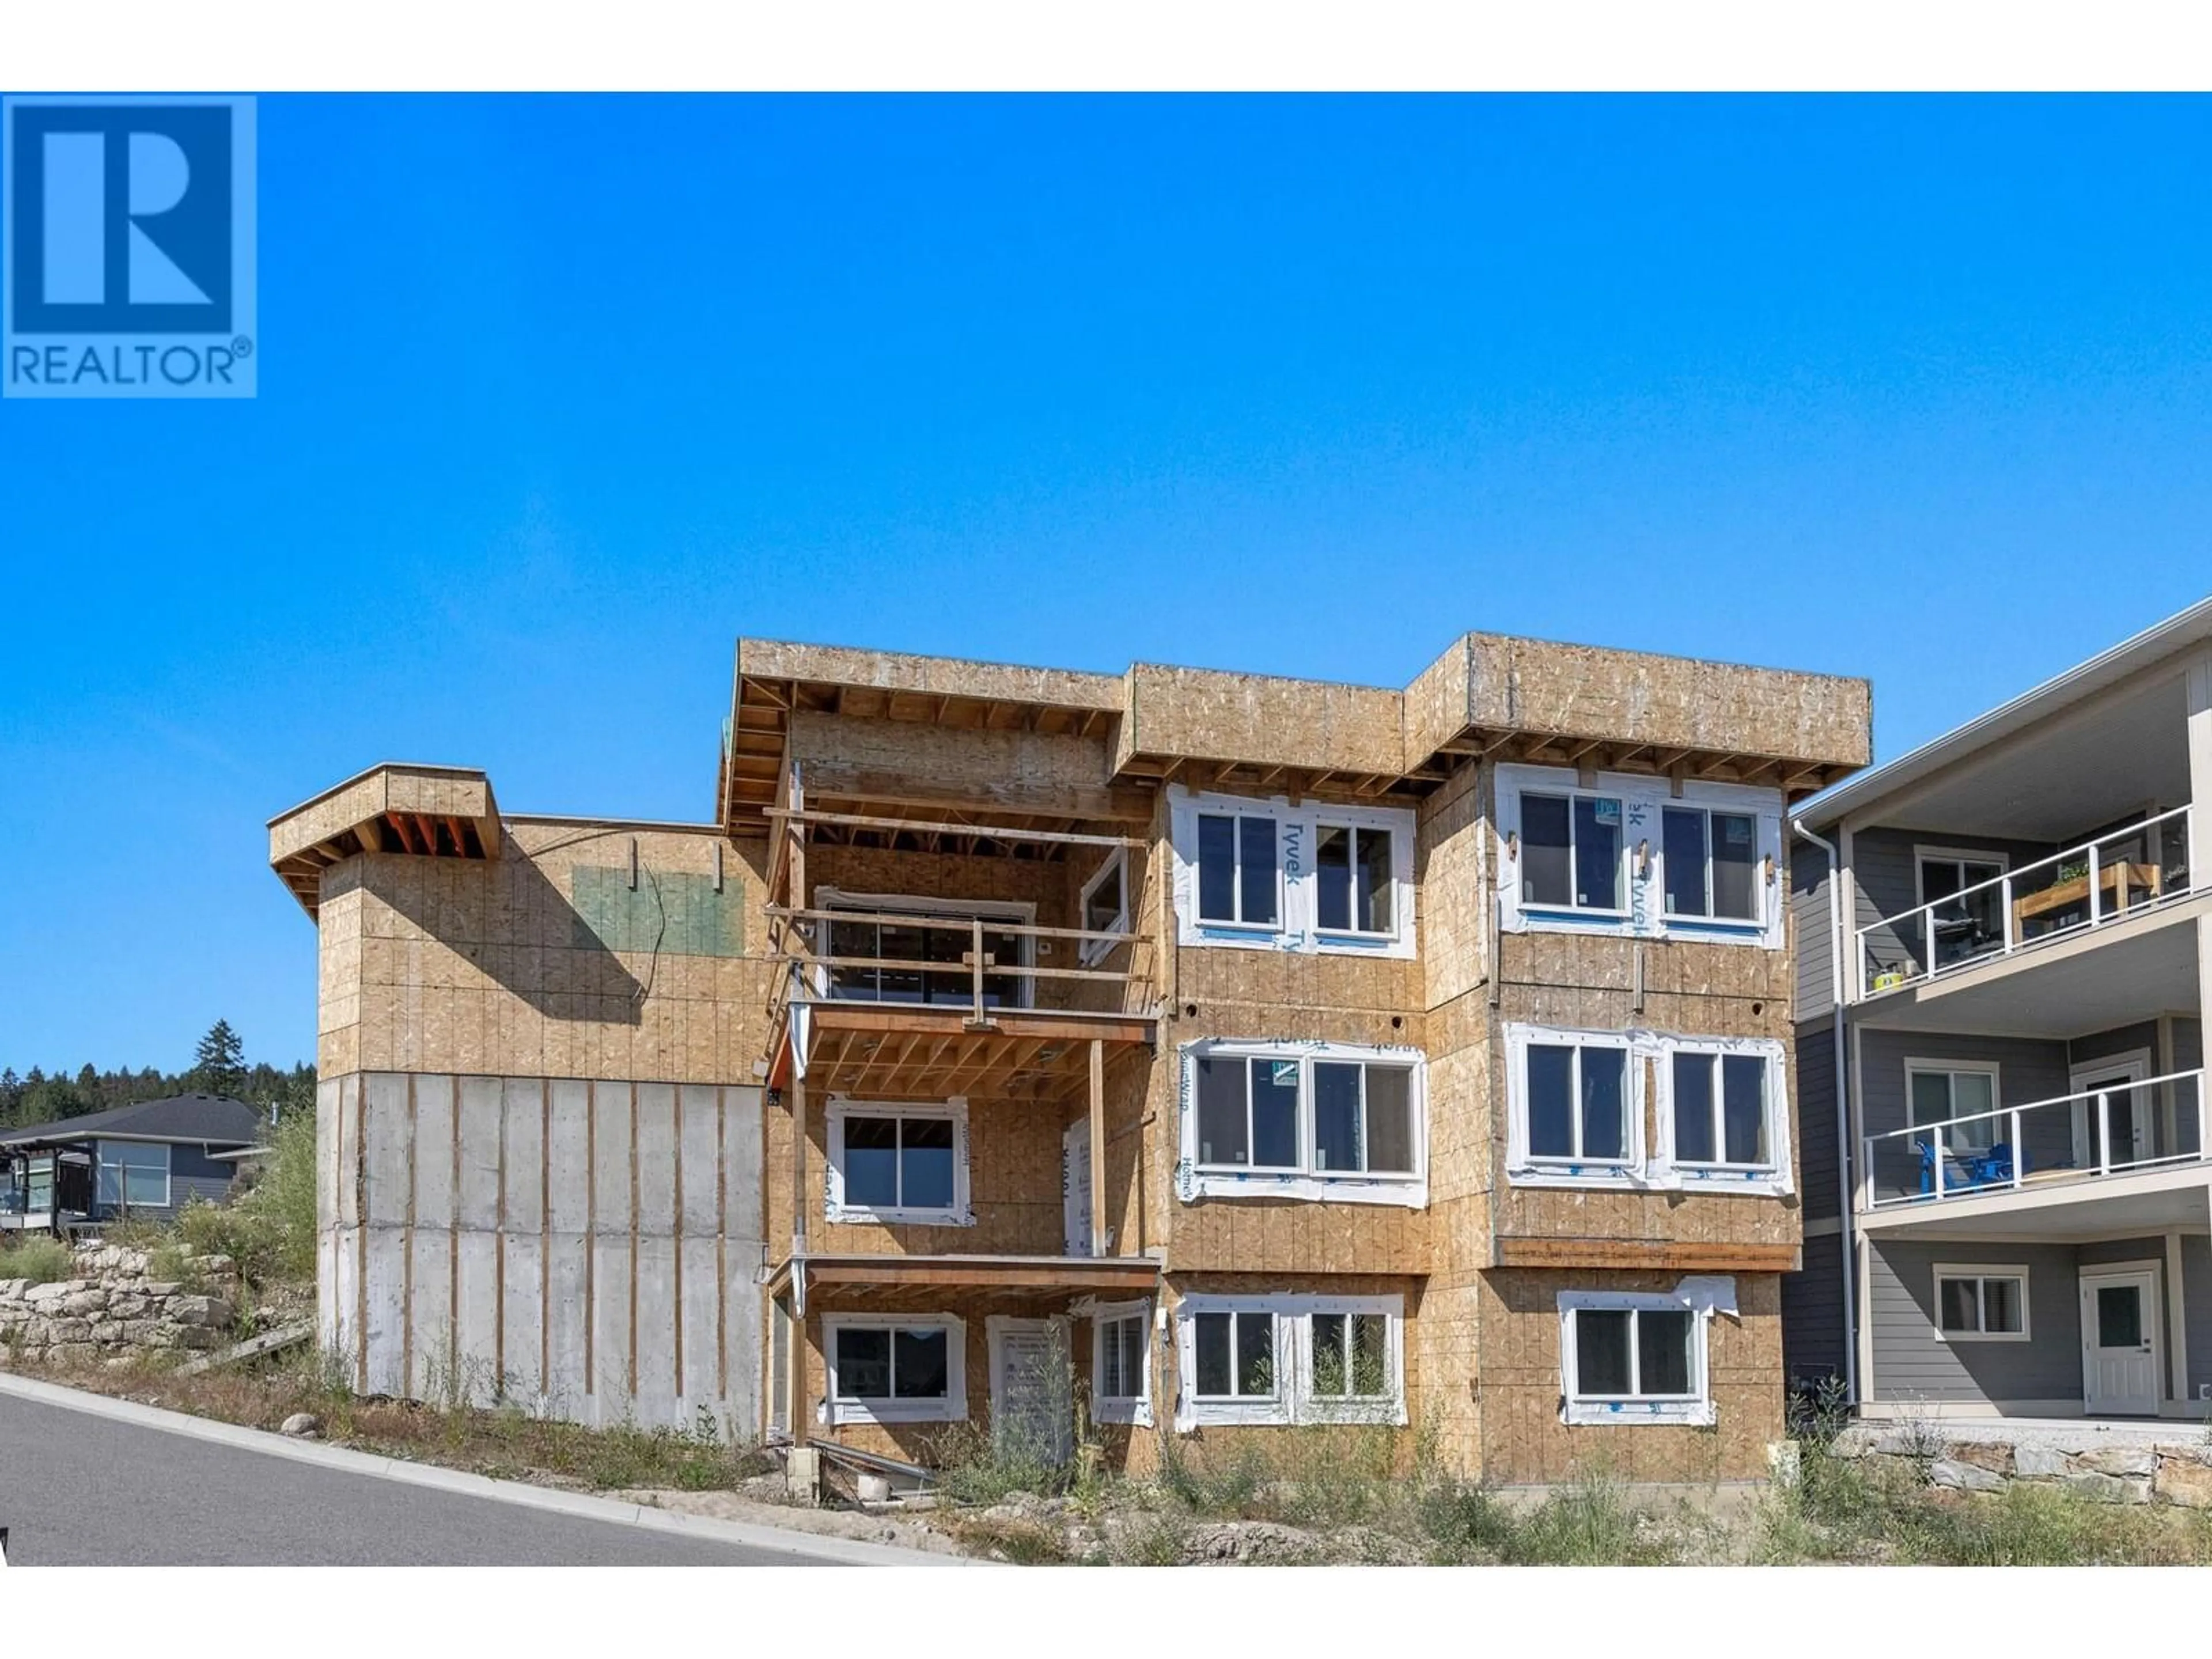 A pic from exterior of the house or condo for 3563 Goldie Way, West Kelowna British Columbia V4T1A3